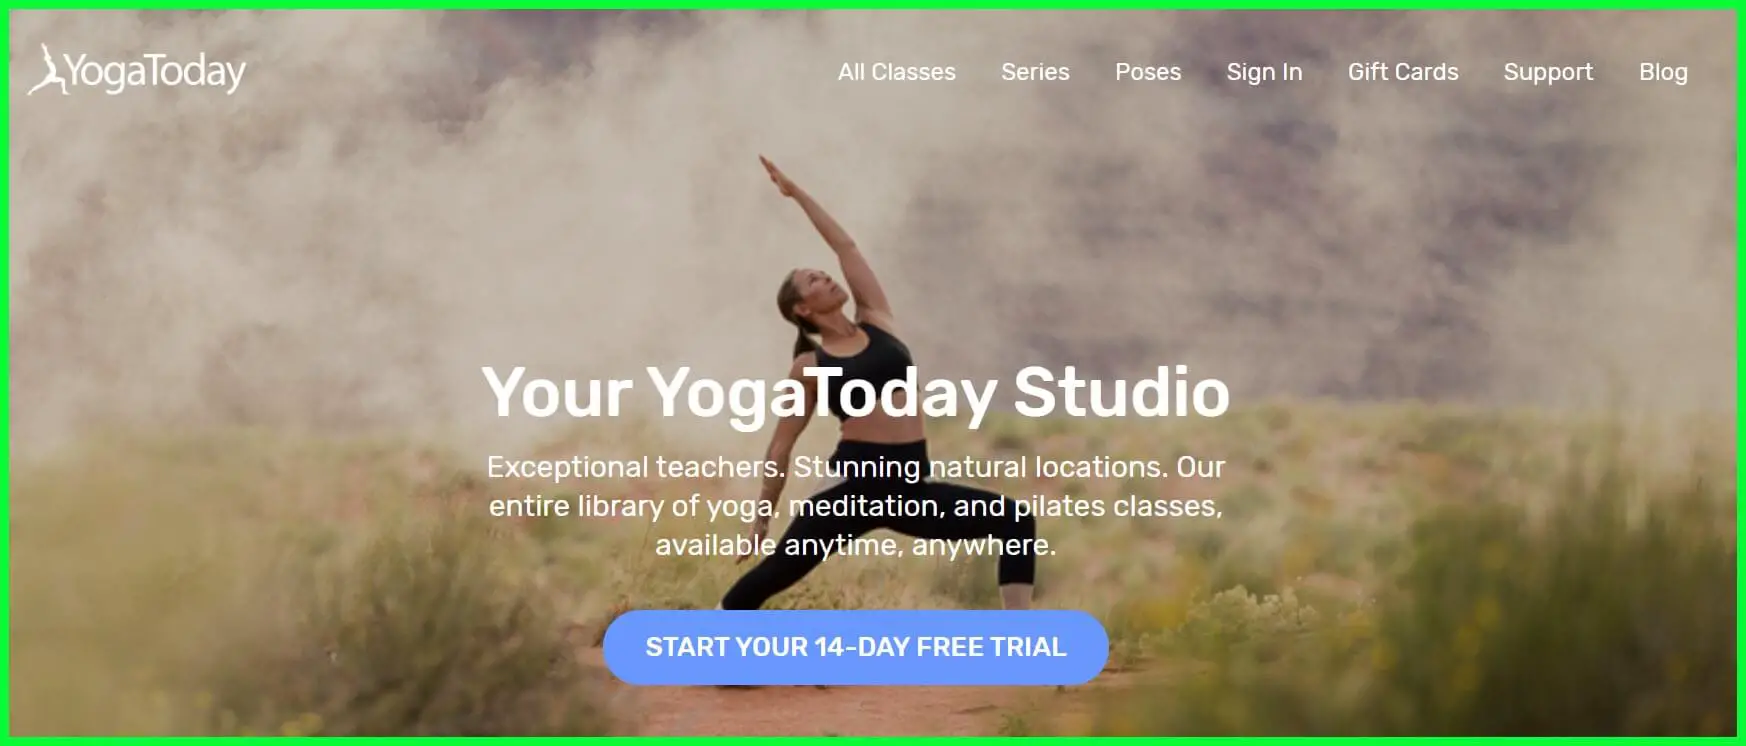 11 Of The Best Yoga Websites To Learn and Practicing Yoga